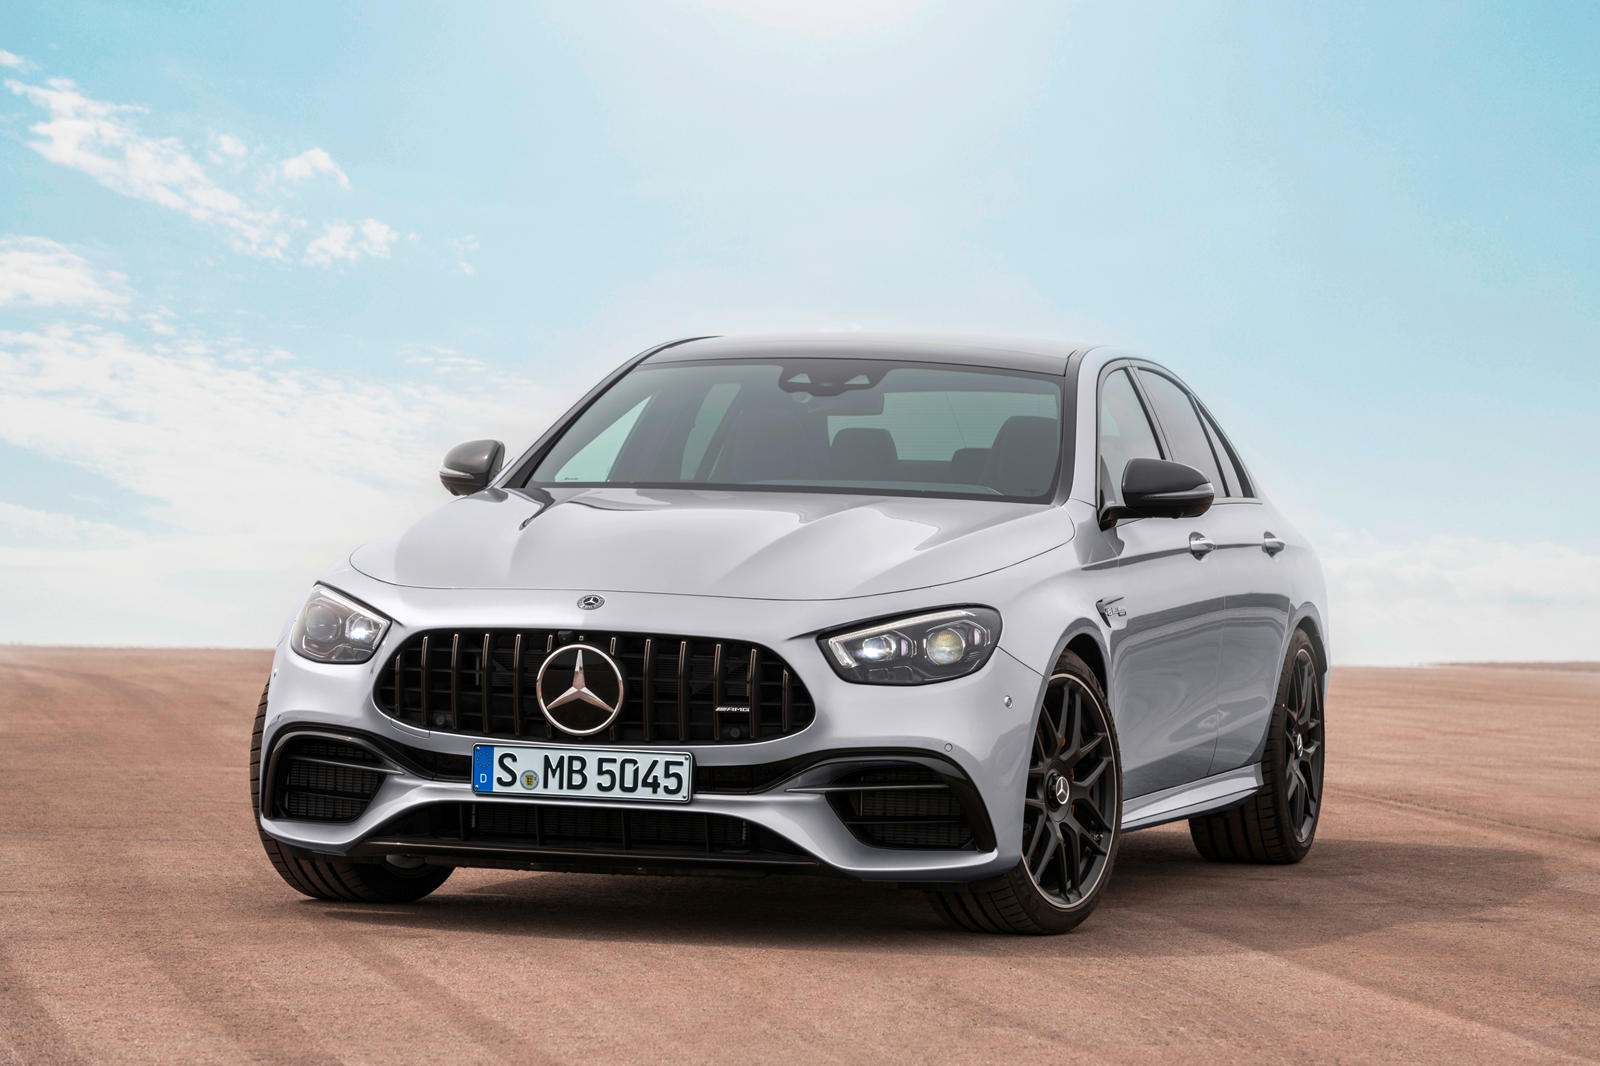 2023 Mercedes-AMG E63 S Review, Pricing, and Specs